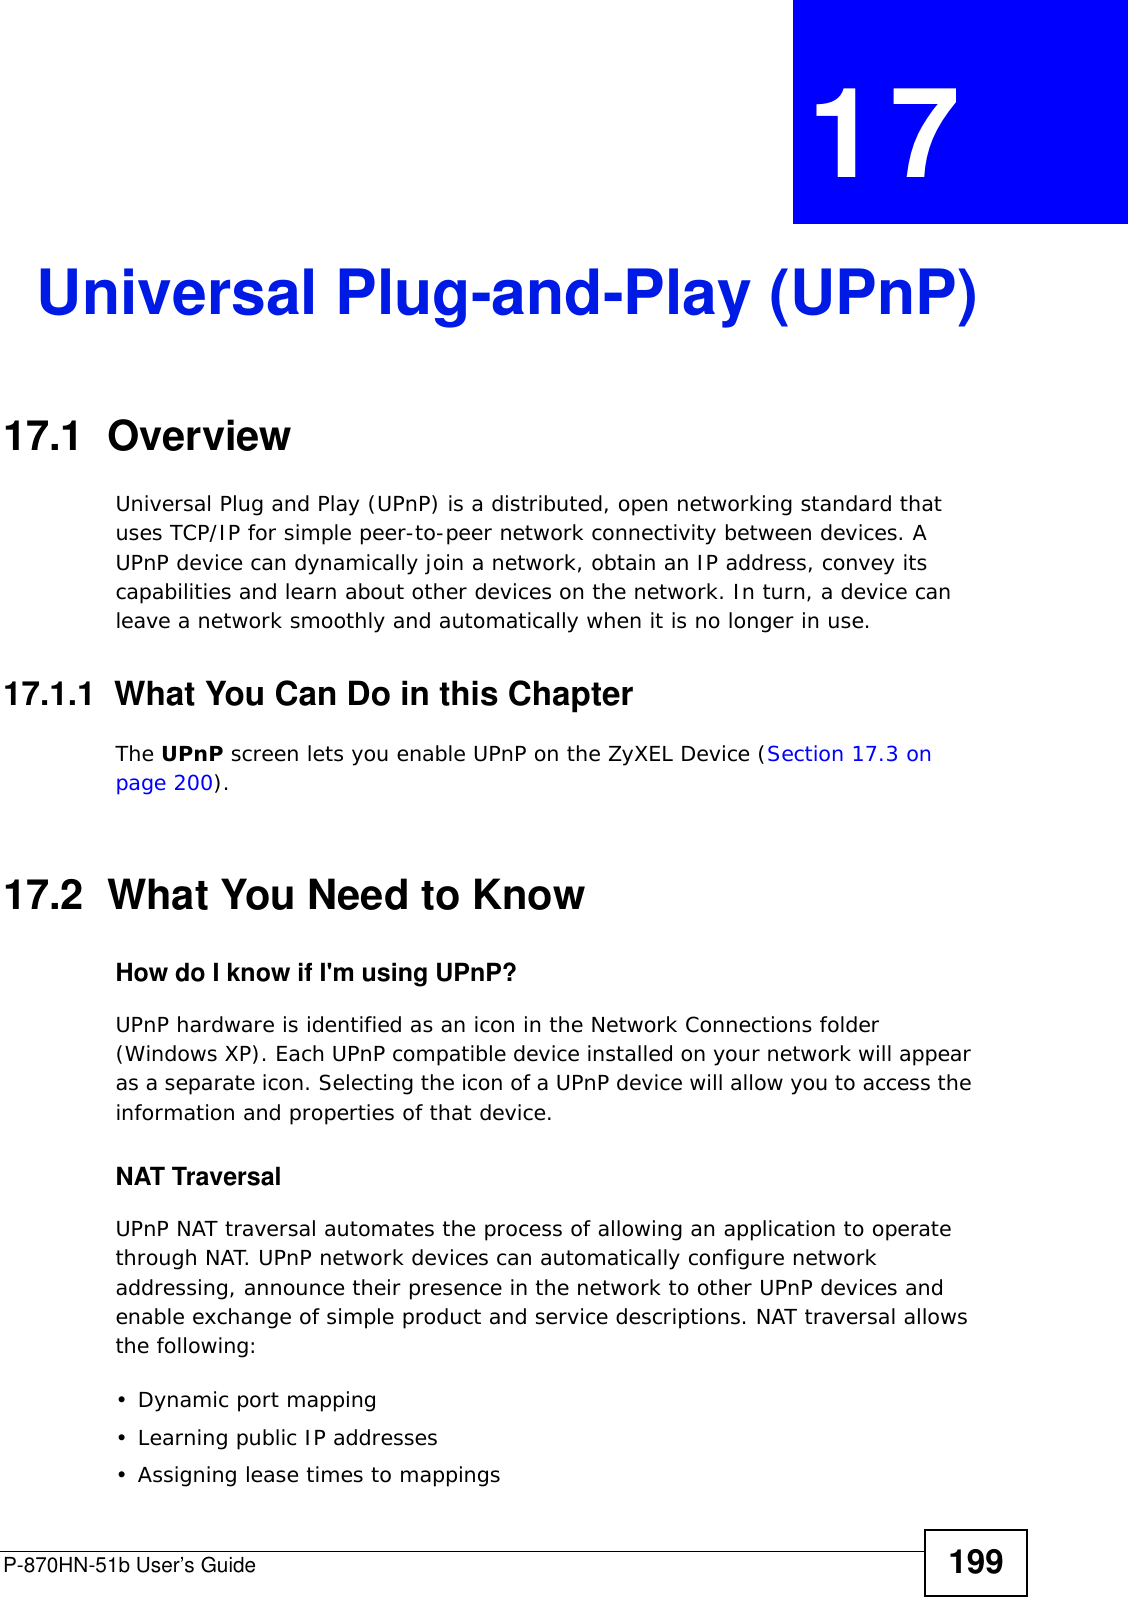 P-870HN-51b User’s Guide 199CHAPTER  17 Universal Plug-and-Play (UPnP)17.1  Overview Universal Plug and Play (UPnP) is a distributed, open networking standard that uses TCP/IP for simple peer-to-peer network connectivity between devices. A UPnP device can dynamically join a network, obtain an IP address, convey its capabilities and learn about other devices on the network. In turn, a device can leave a network smoothly and automatically when it is no longer in use.17.1.1  What You Can Do in this ChapterThe UPnP screen lets you enable UPnP on the ZyXEL Device (Section 17.3 on page 200).17.2  What You Need to KnowHow do I know if I&apos;m using UPnP? UPnP hardware is identified as an icon in the Network Connections folder (Windows XP). Each UPnP compatible device installed on your network will appear as a separate icon. Selecting the icon of a UPnP device will allow you to access the information and properties of that device. NAT TraversalUPnP NAT traversal automates the process of allowing an application to operate through NAT. UPnP network devices can automatically configure network addressing, announce their presence in the network to other UPnP devices and enable exchange of simple product and service descriptions. NAT traversal allows the following:• Dynamic port mapping• Learning public IP addresses• Assigning lease times to mappings